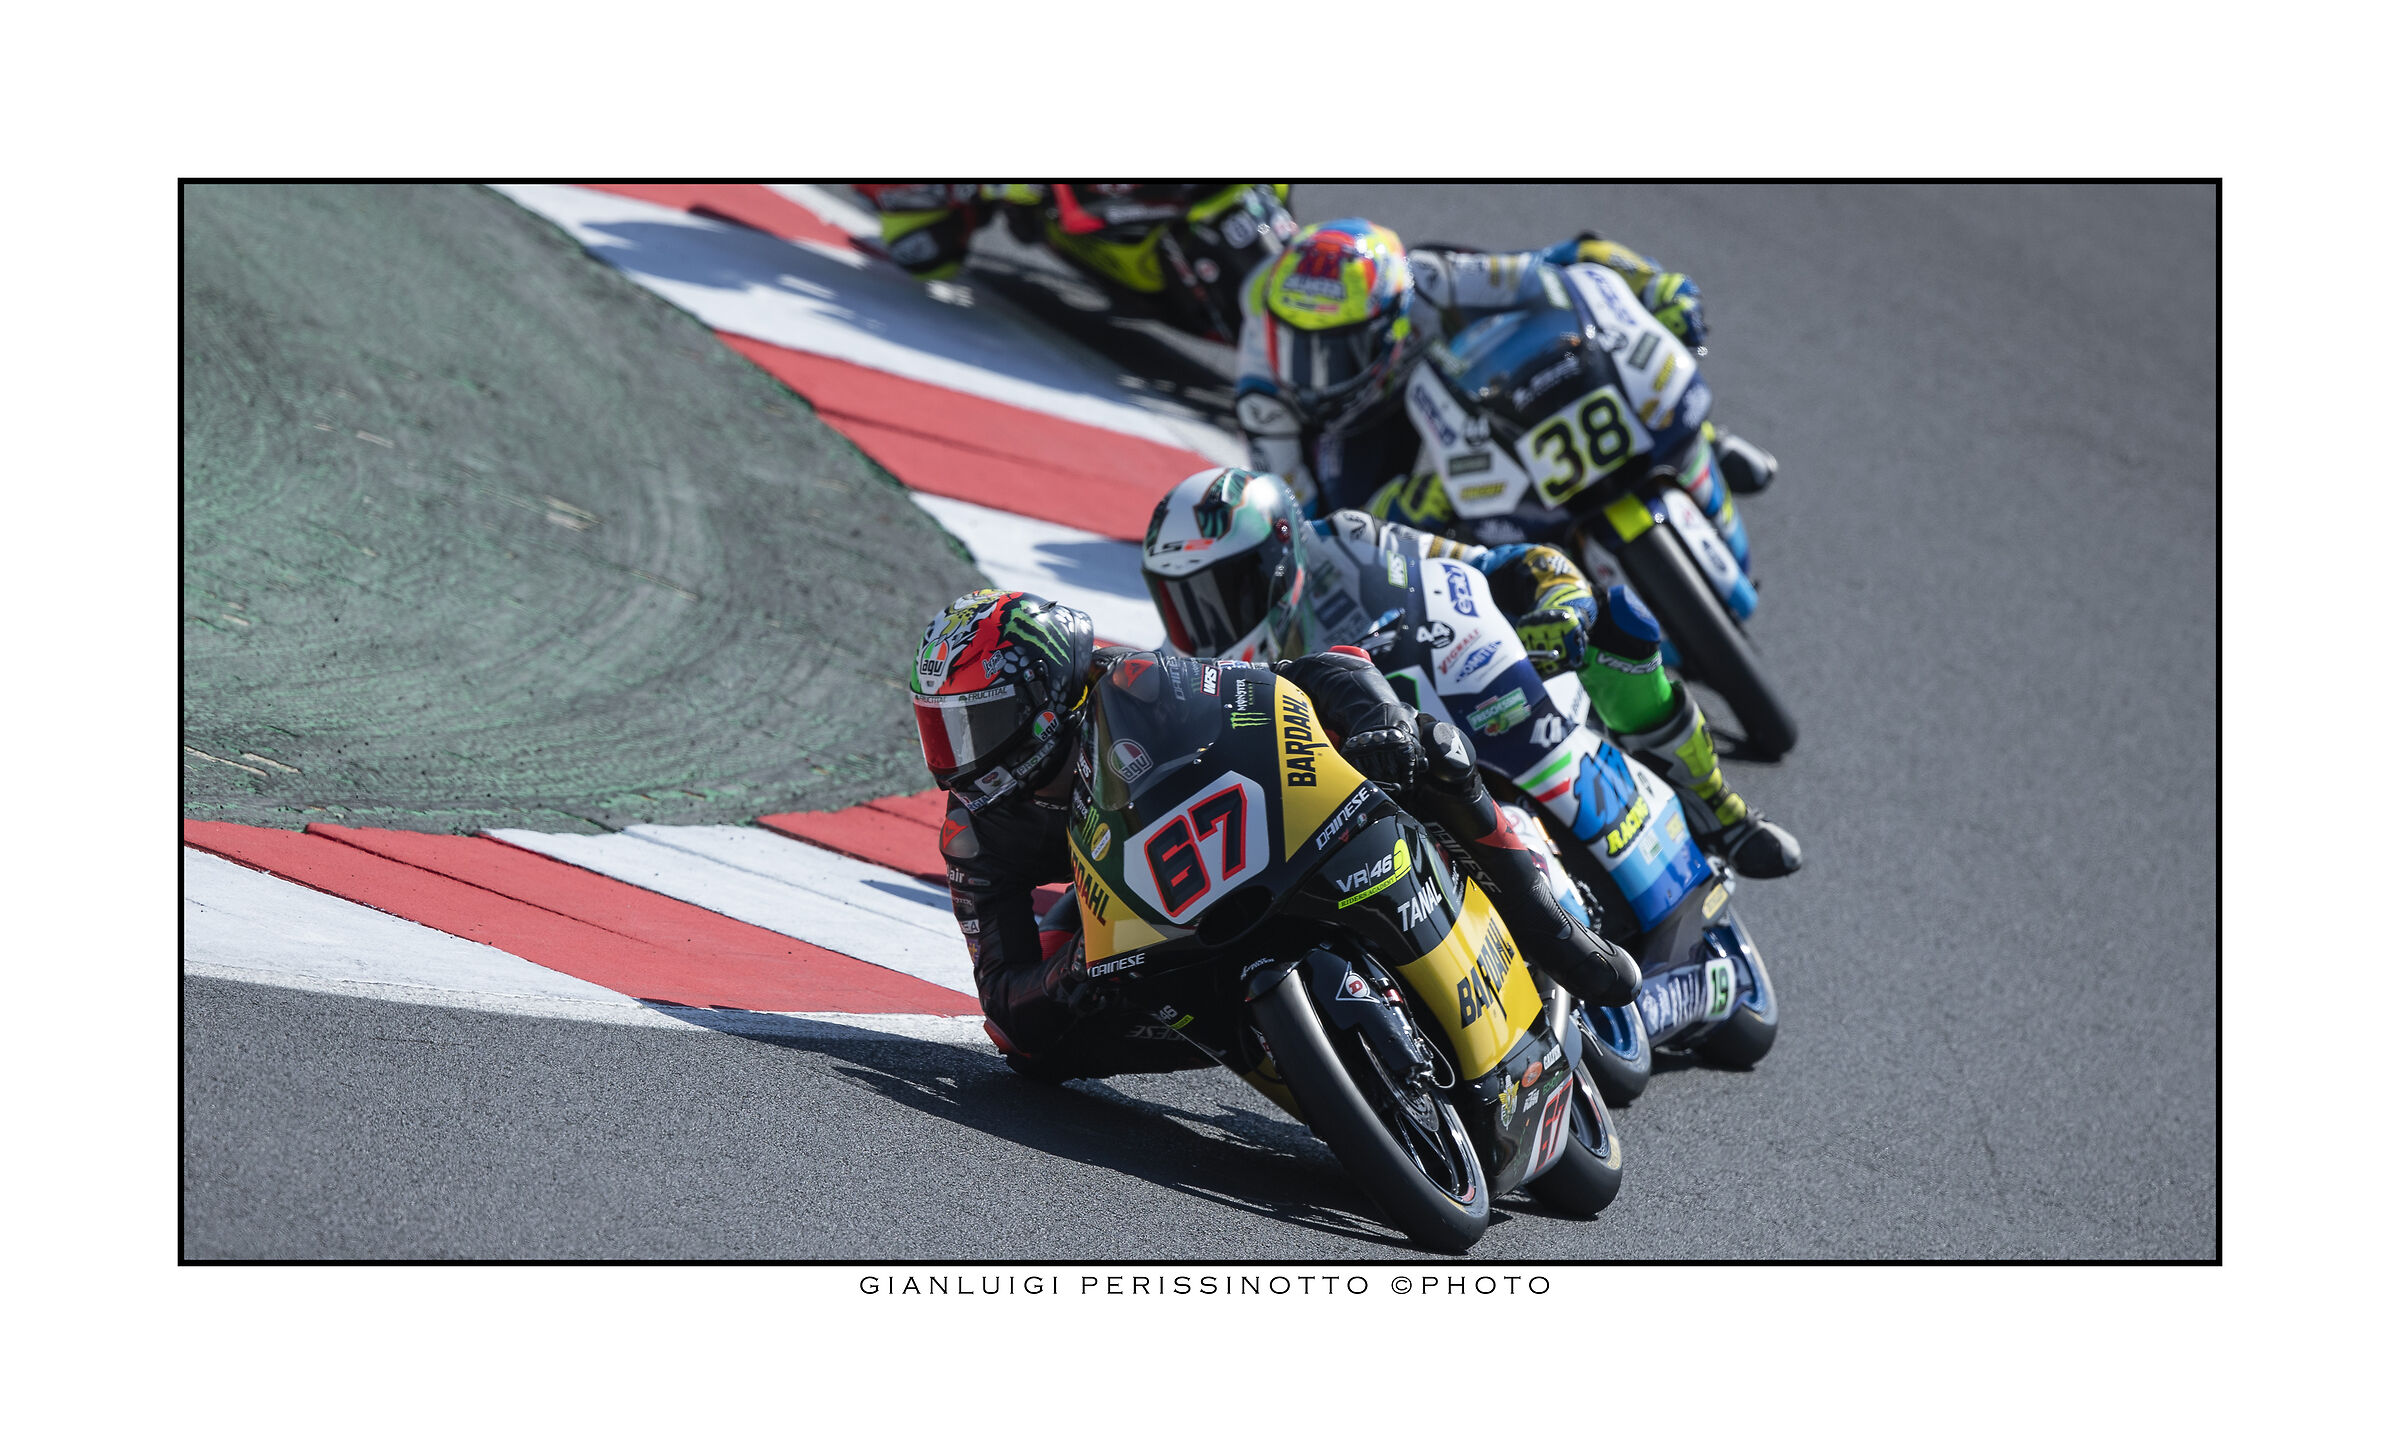 Moto3-Curve of the Chariot...